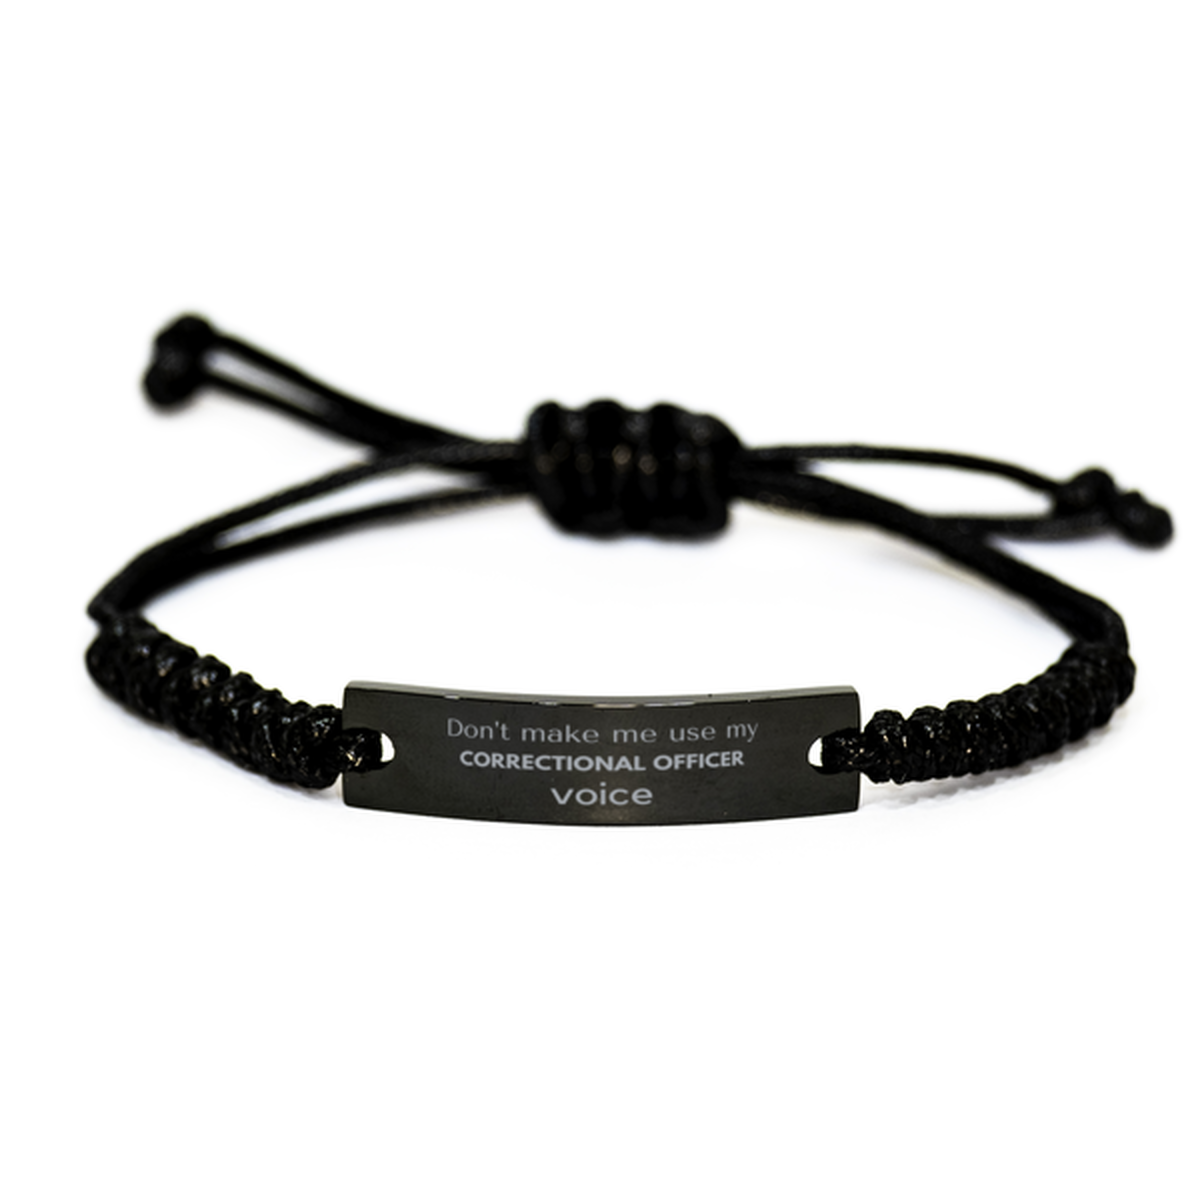 Don't make me use my Correctional Officer voice, Sarcasm Correctional Officer Gifts, Christmas Correctional Officer Black Rope Bracelet Birthday Unique Gifts For Correctional Officer Coworkers, Men, Women, Colleague, Friends